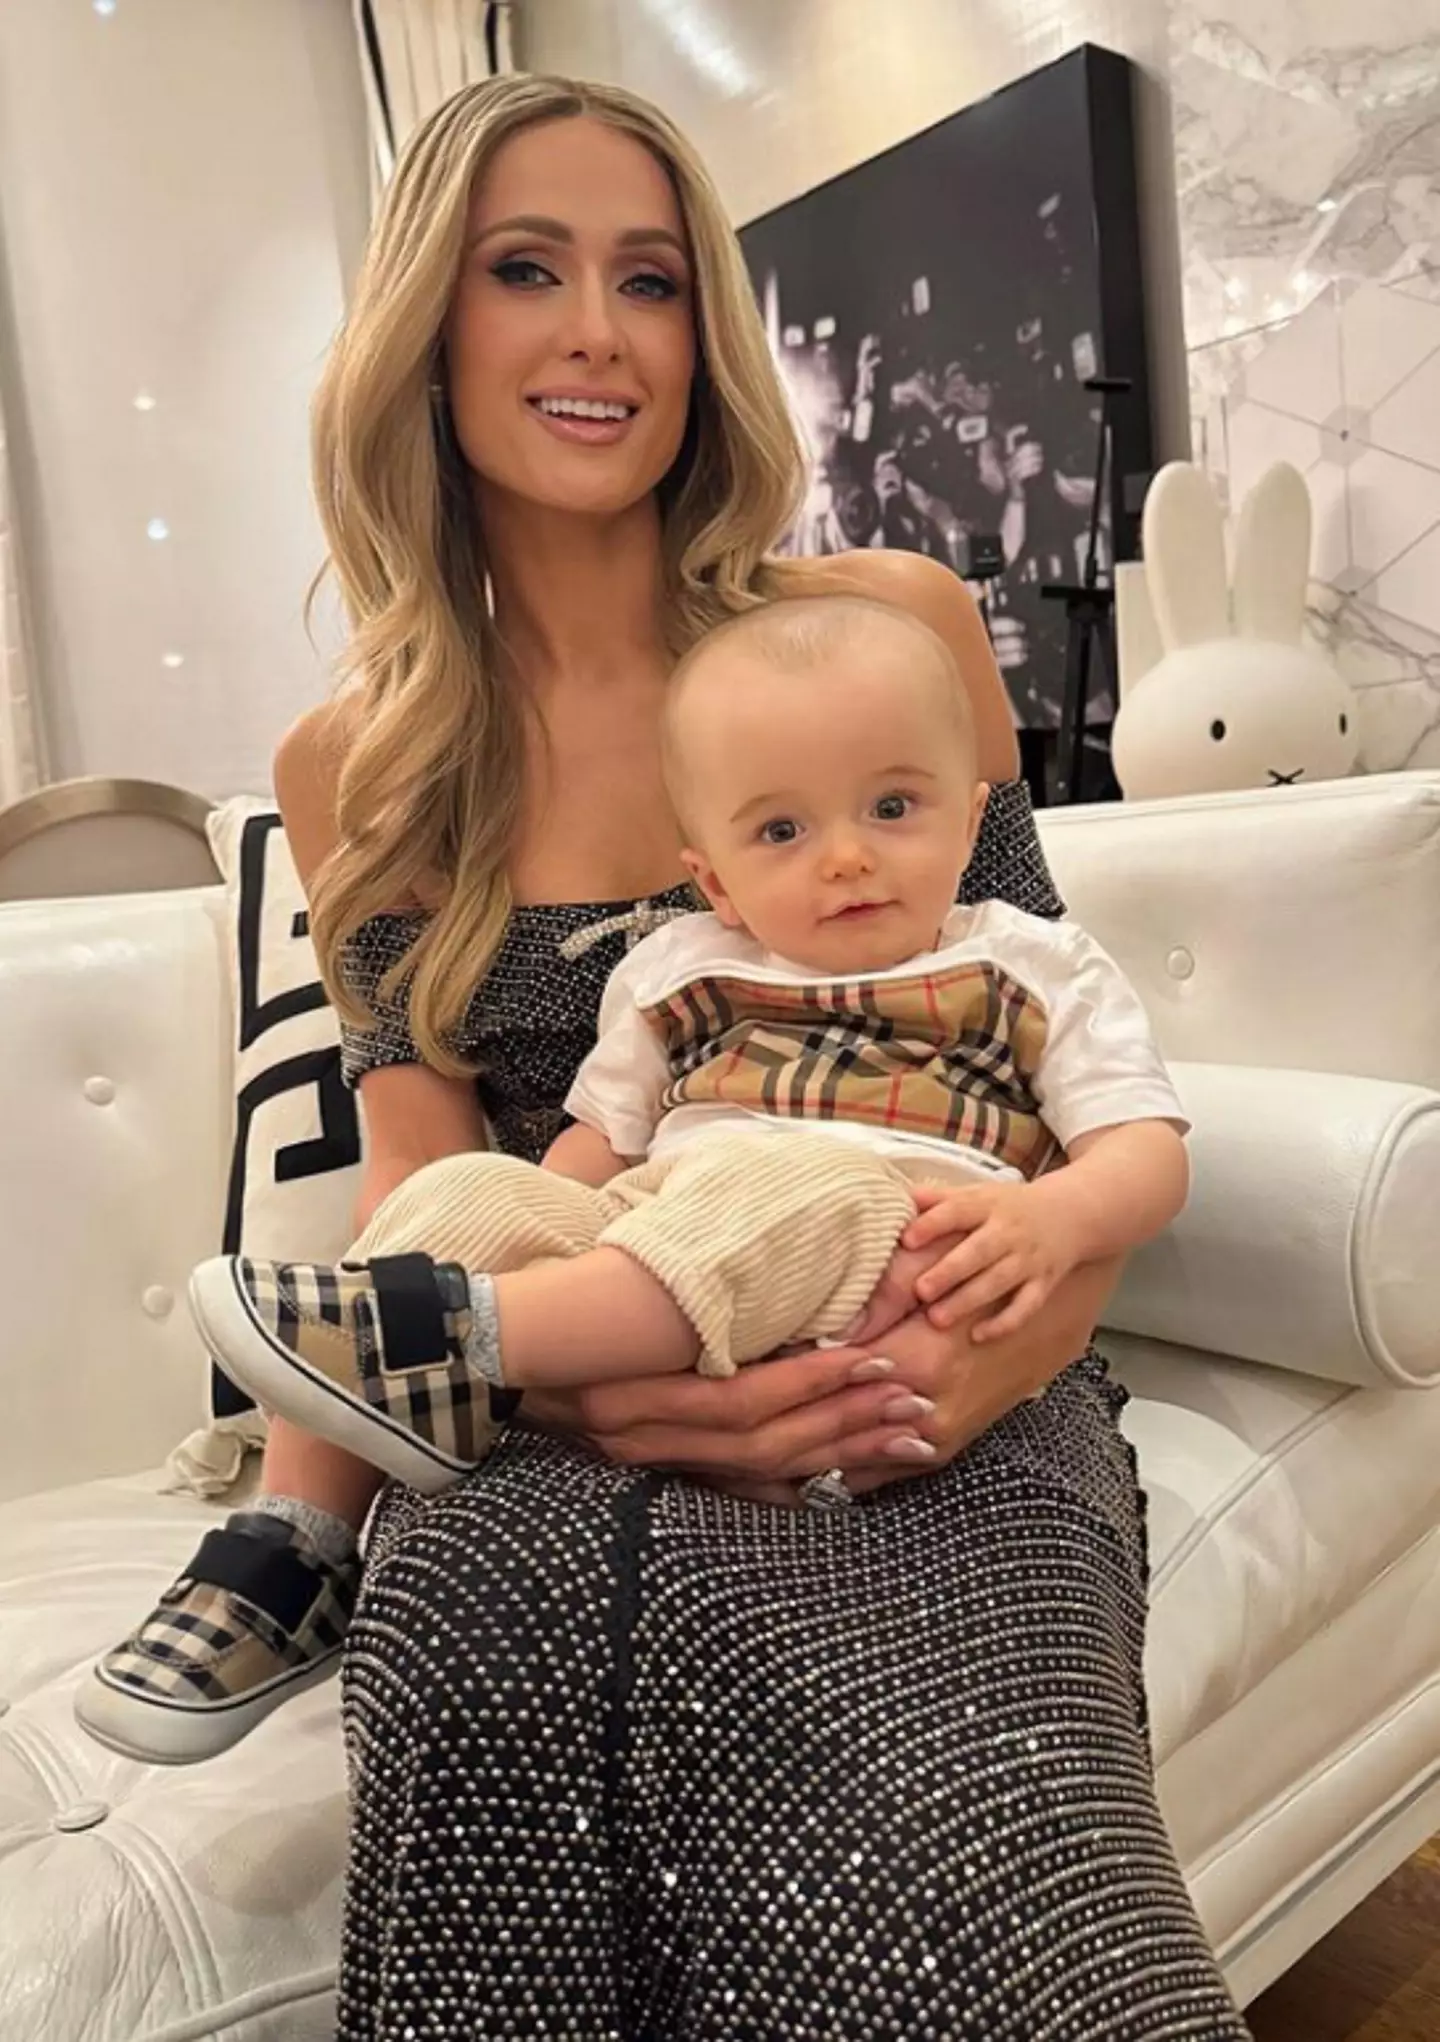 Paris Hilton welcomed her first child earlier this year.